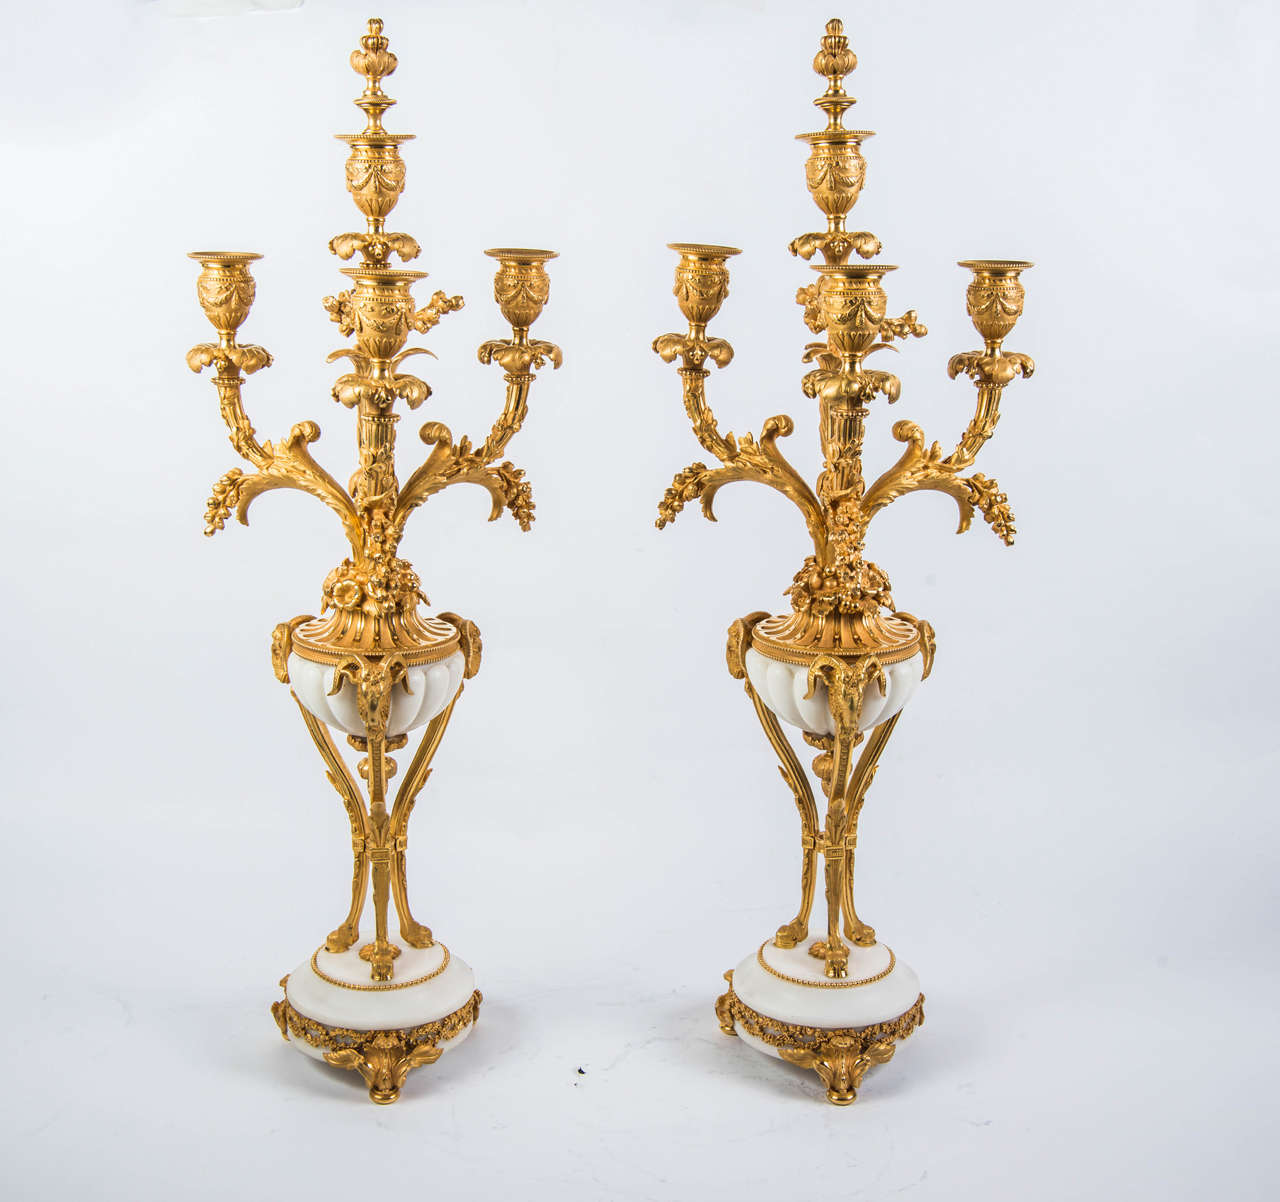 2 gilded bronze and marble candelabras- 5 arms of lights.